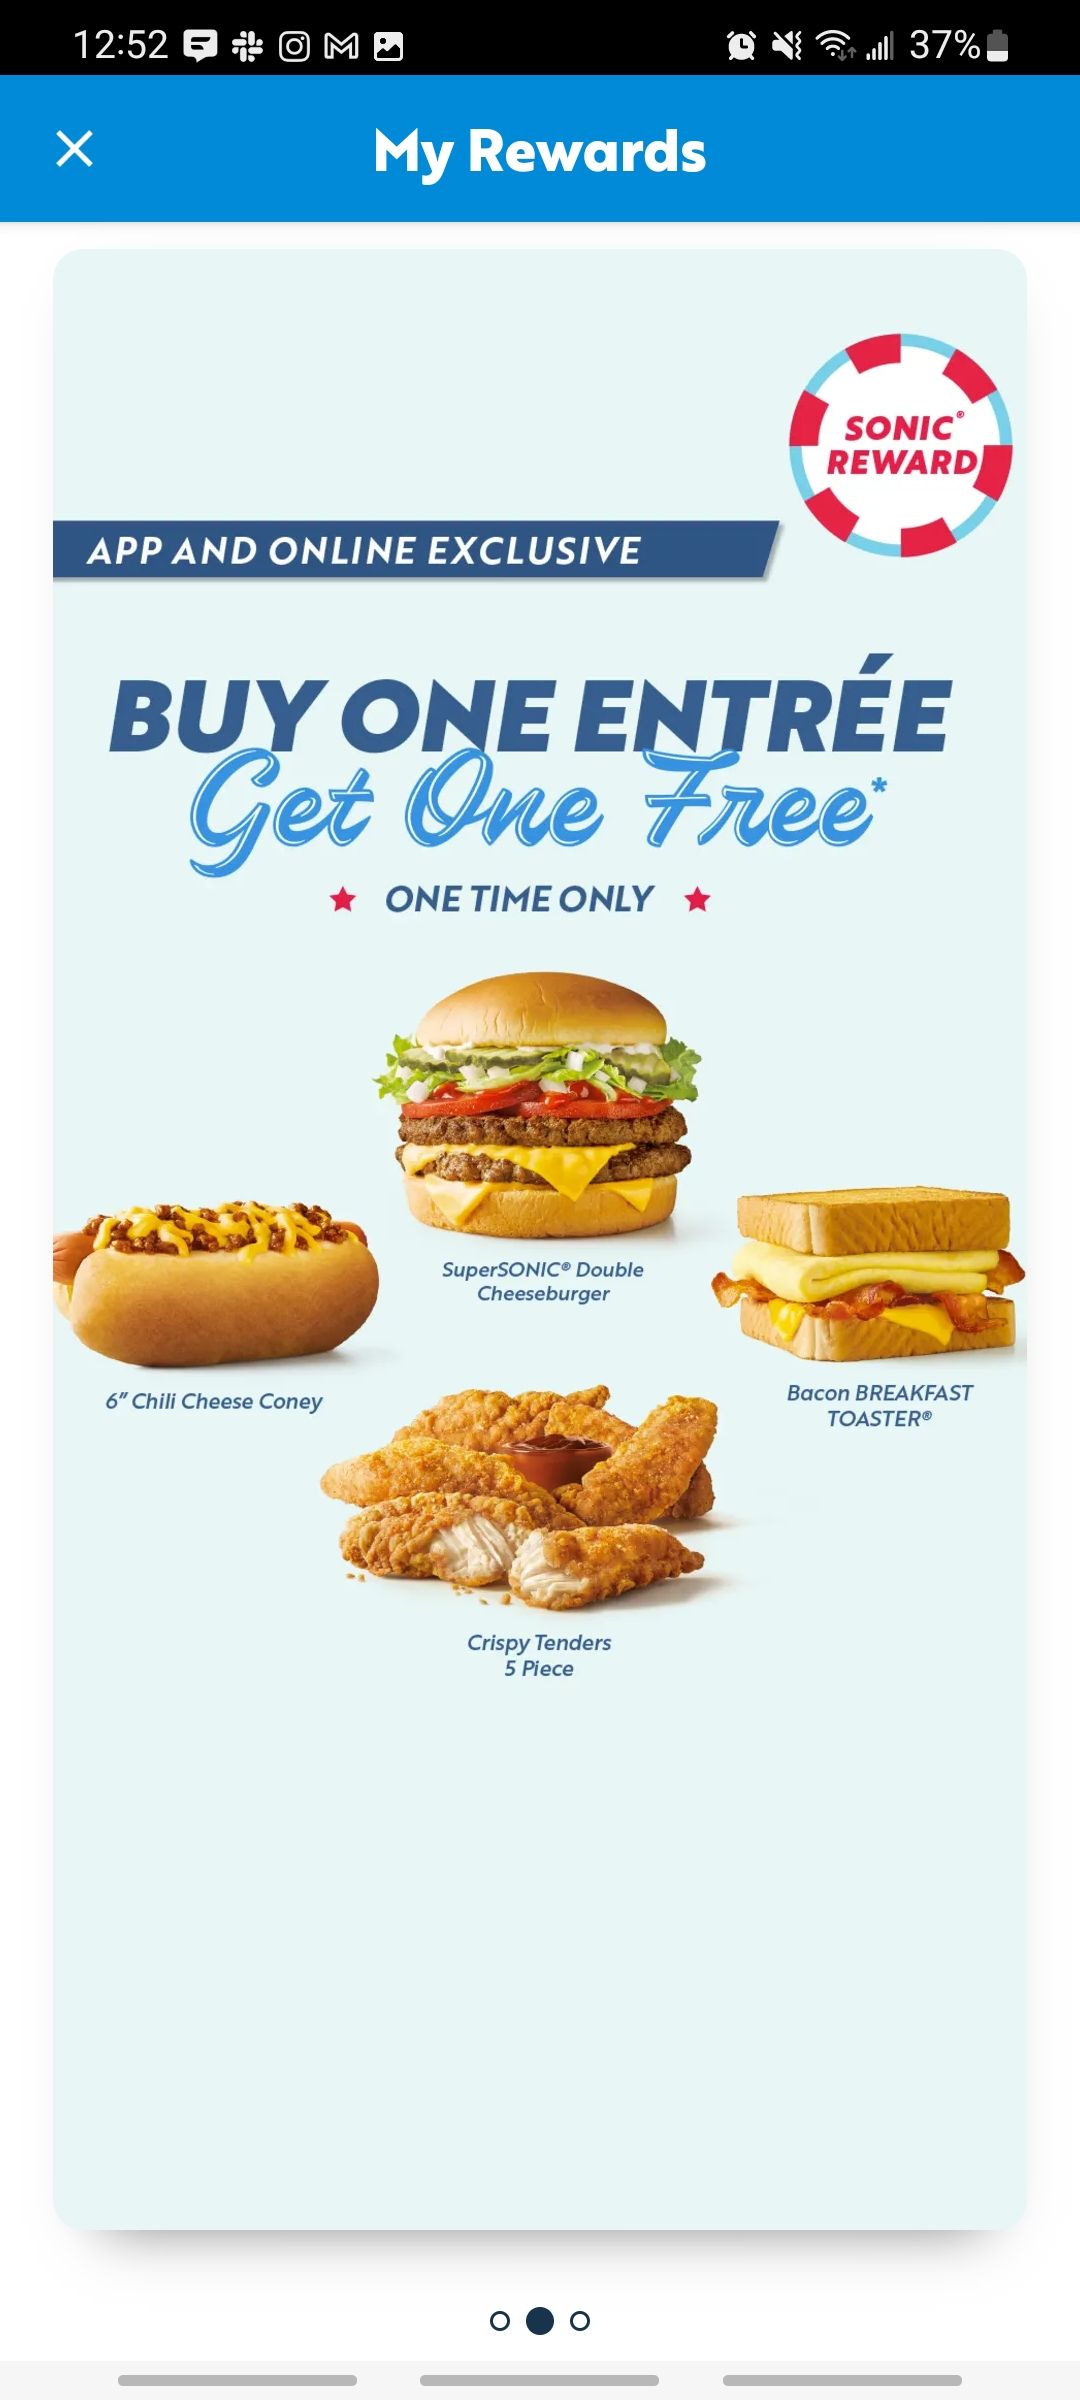 sonic app and online exclusive for buy one entree get one free